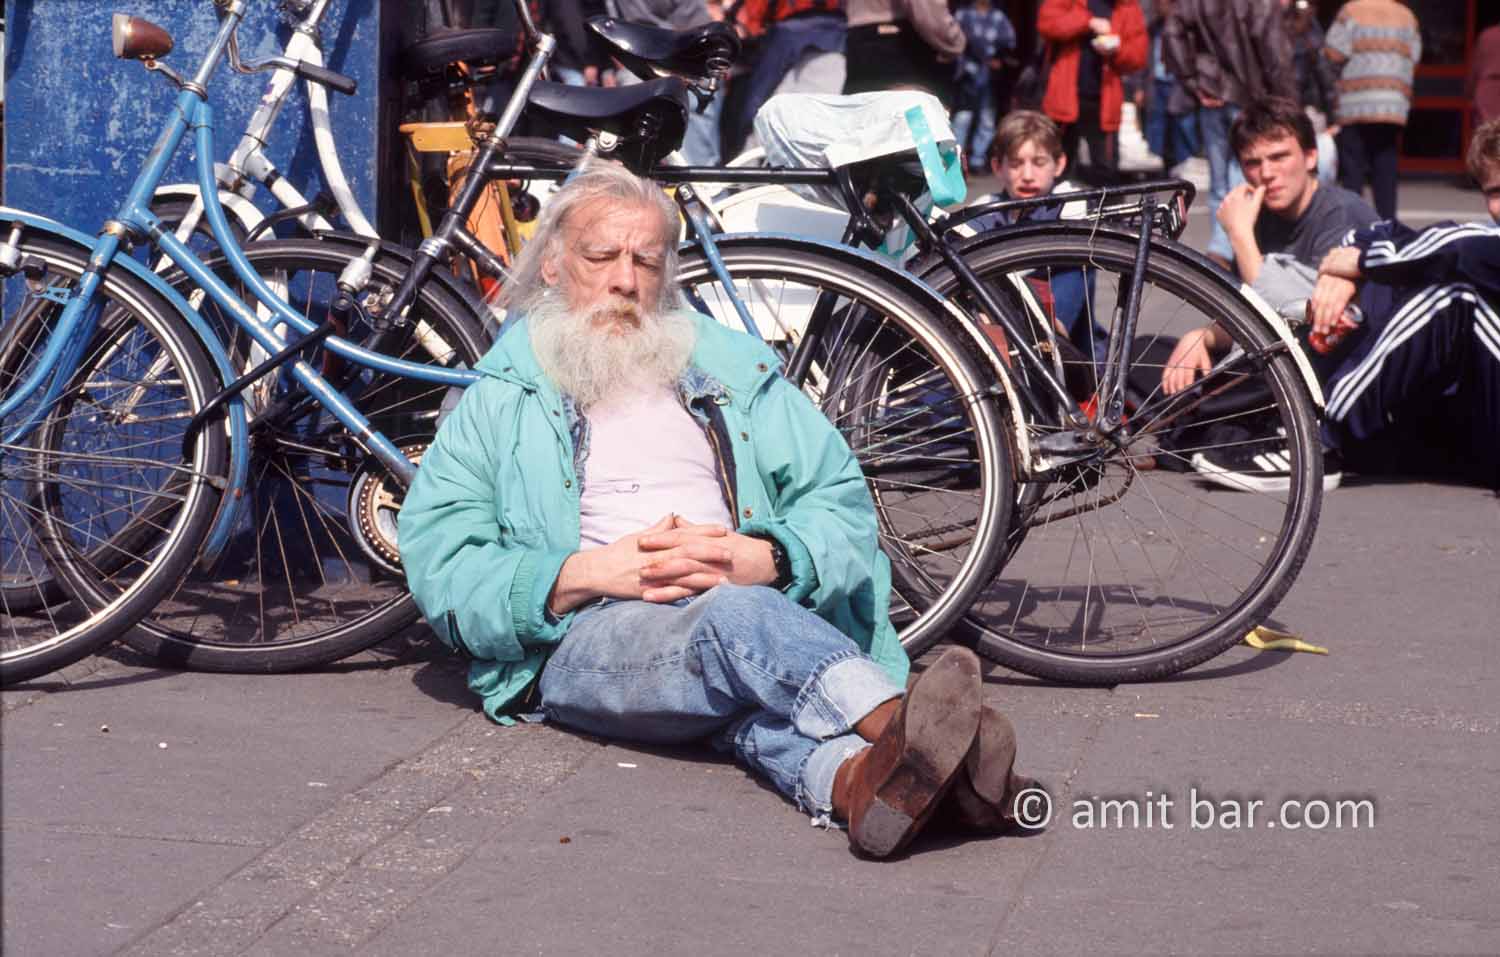 Old man sleeping: Old man is sleeping at the Central Station in Amsterdam